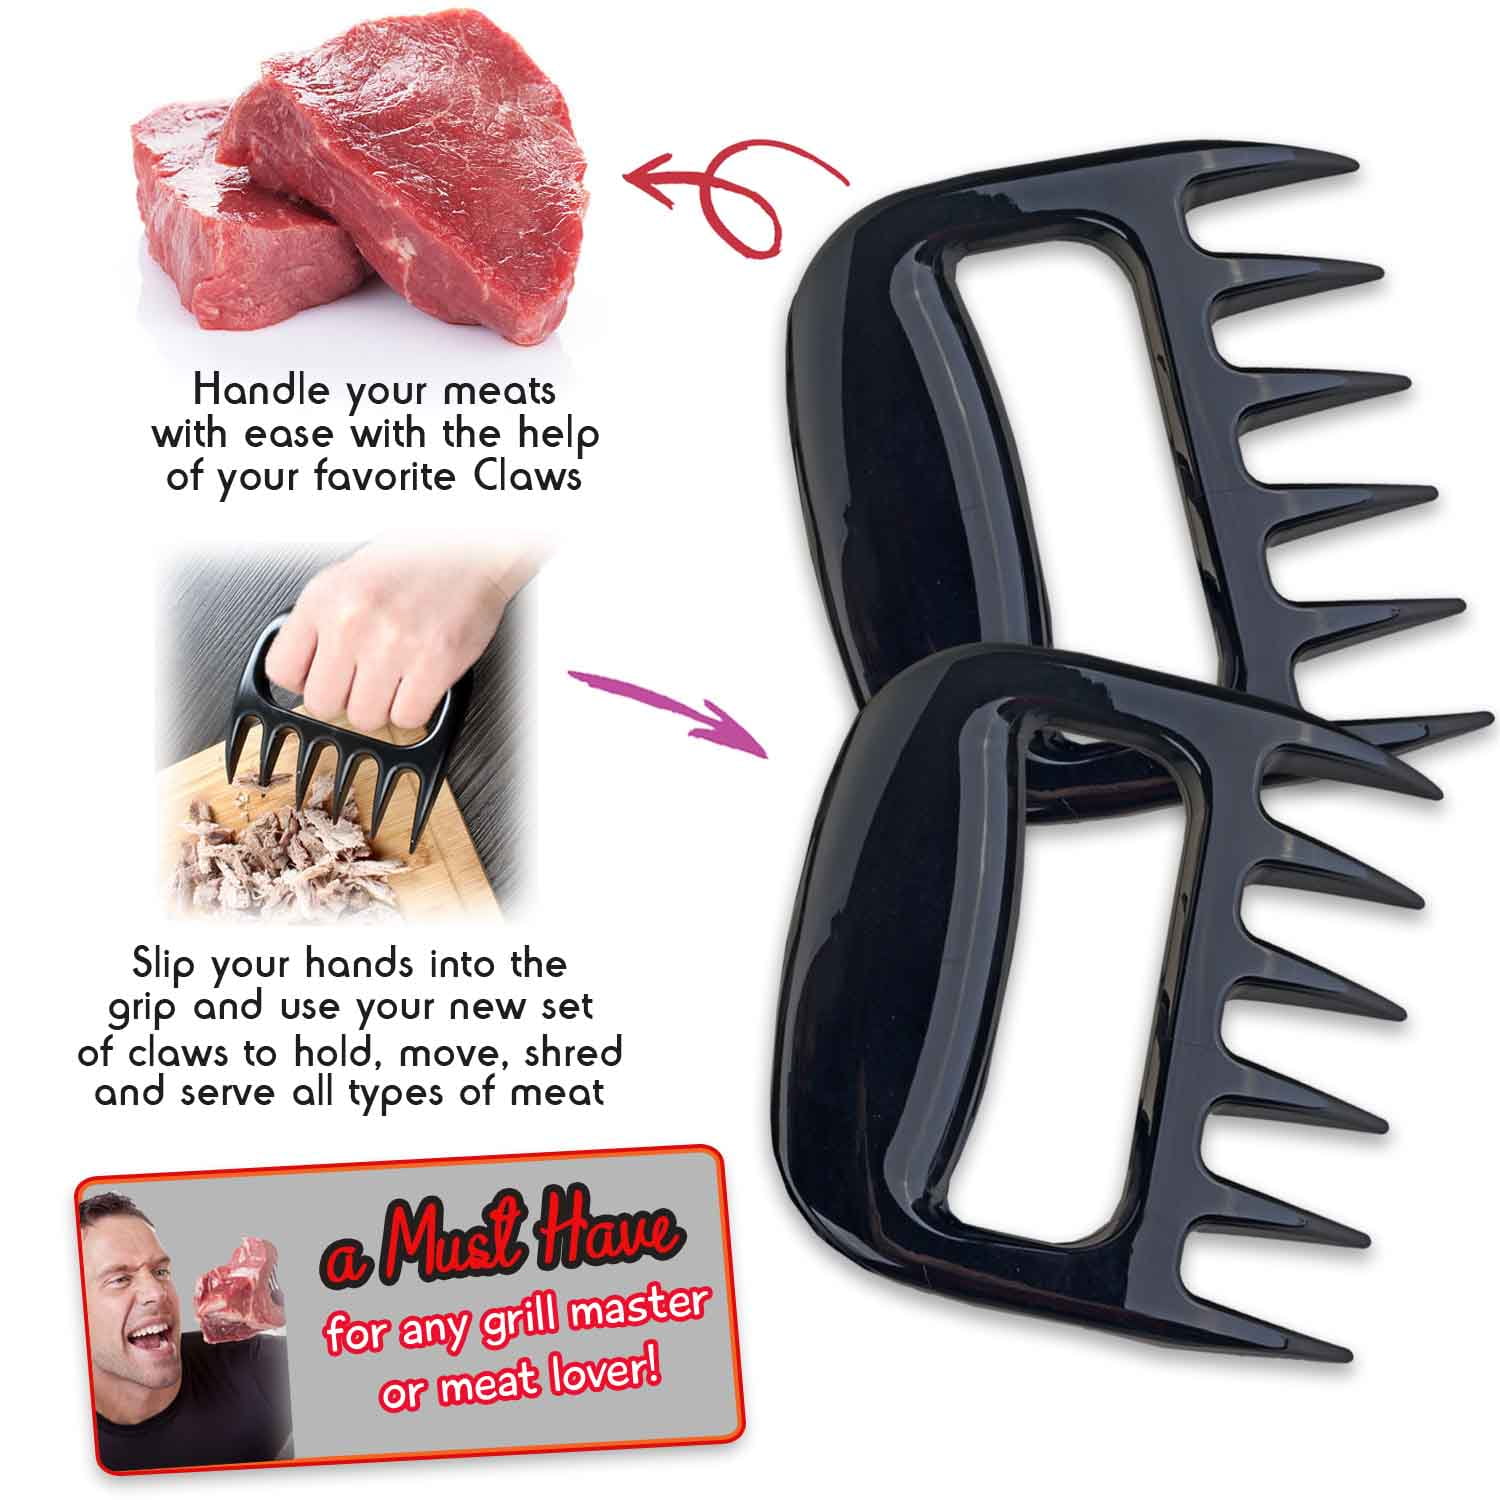 Barbecue Pulled Pork Shredder for Turkey Funny Grill Tool Kitchen Gadget Chicken BBQ Claws Boss Boyfriend A/A Meat Claws for Shredding Funny Stocking Stuffers for Men Dads Grillers 